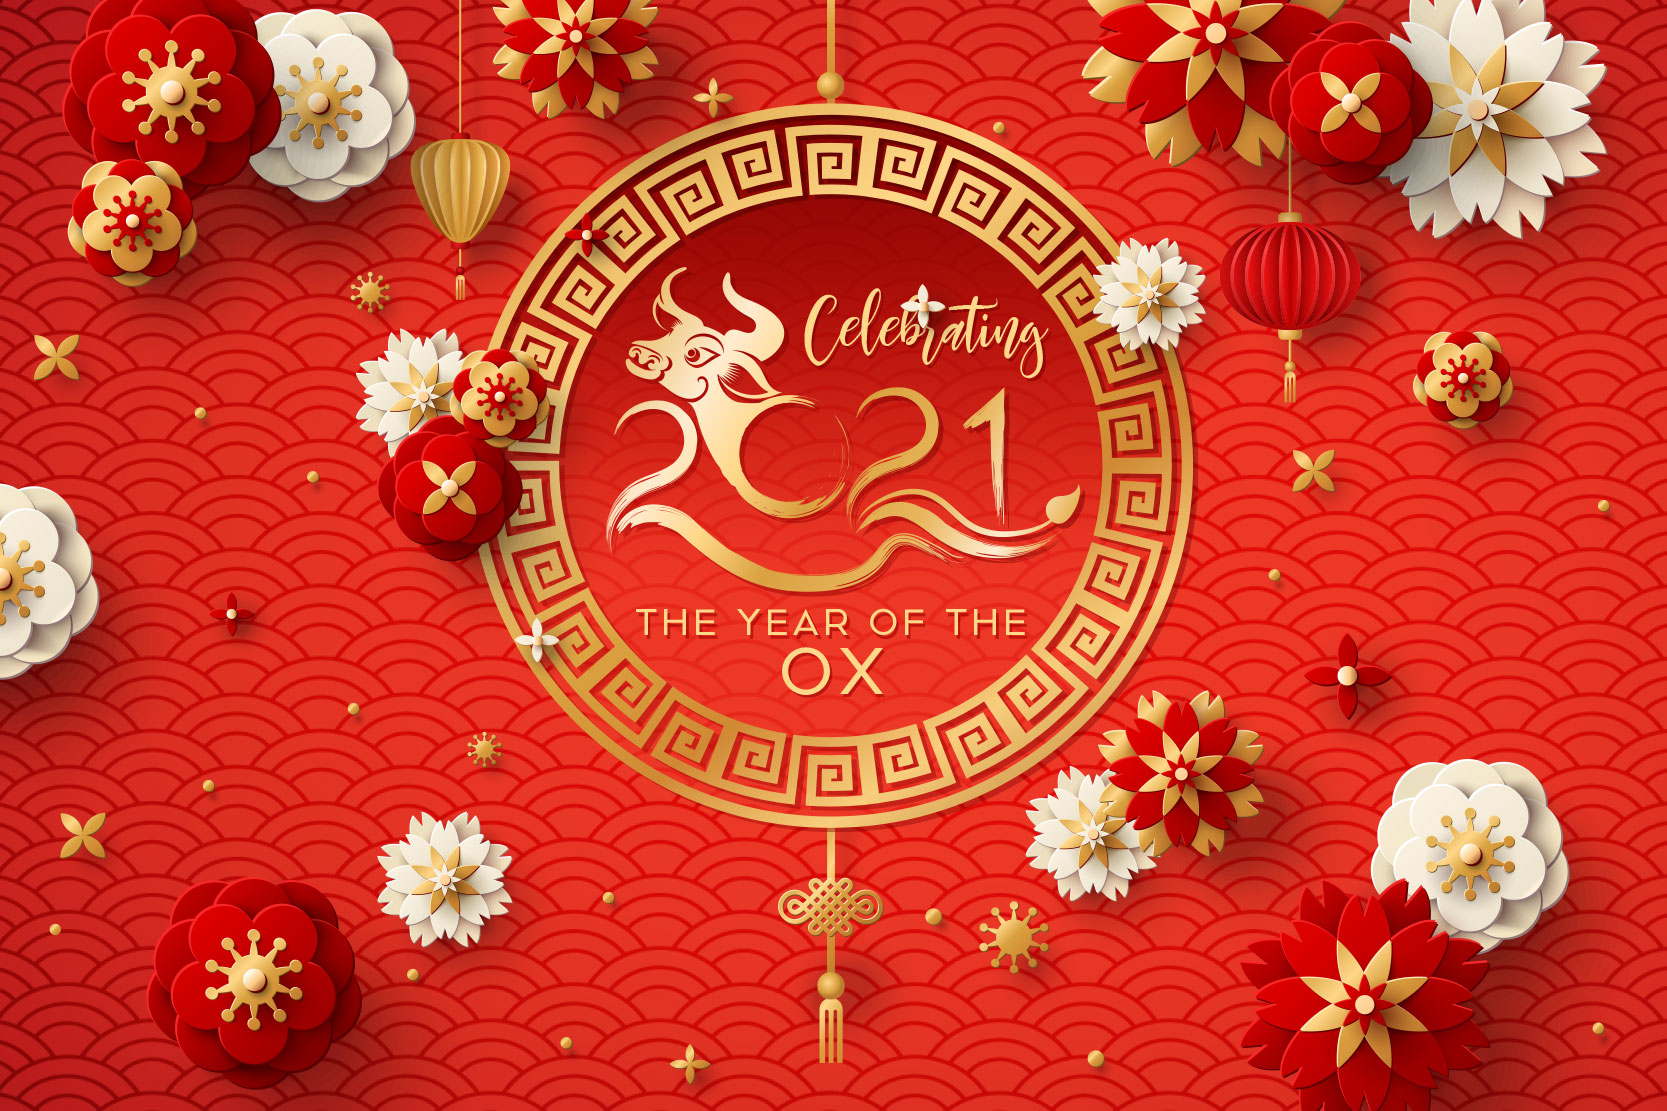 5394SBP Sunnybank Plaza LNY Whats On Web Tile - LUNAR NEW YEAR 2021 - YEAR OF THE OX